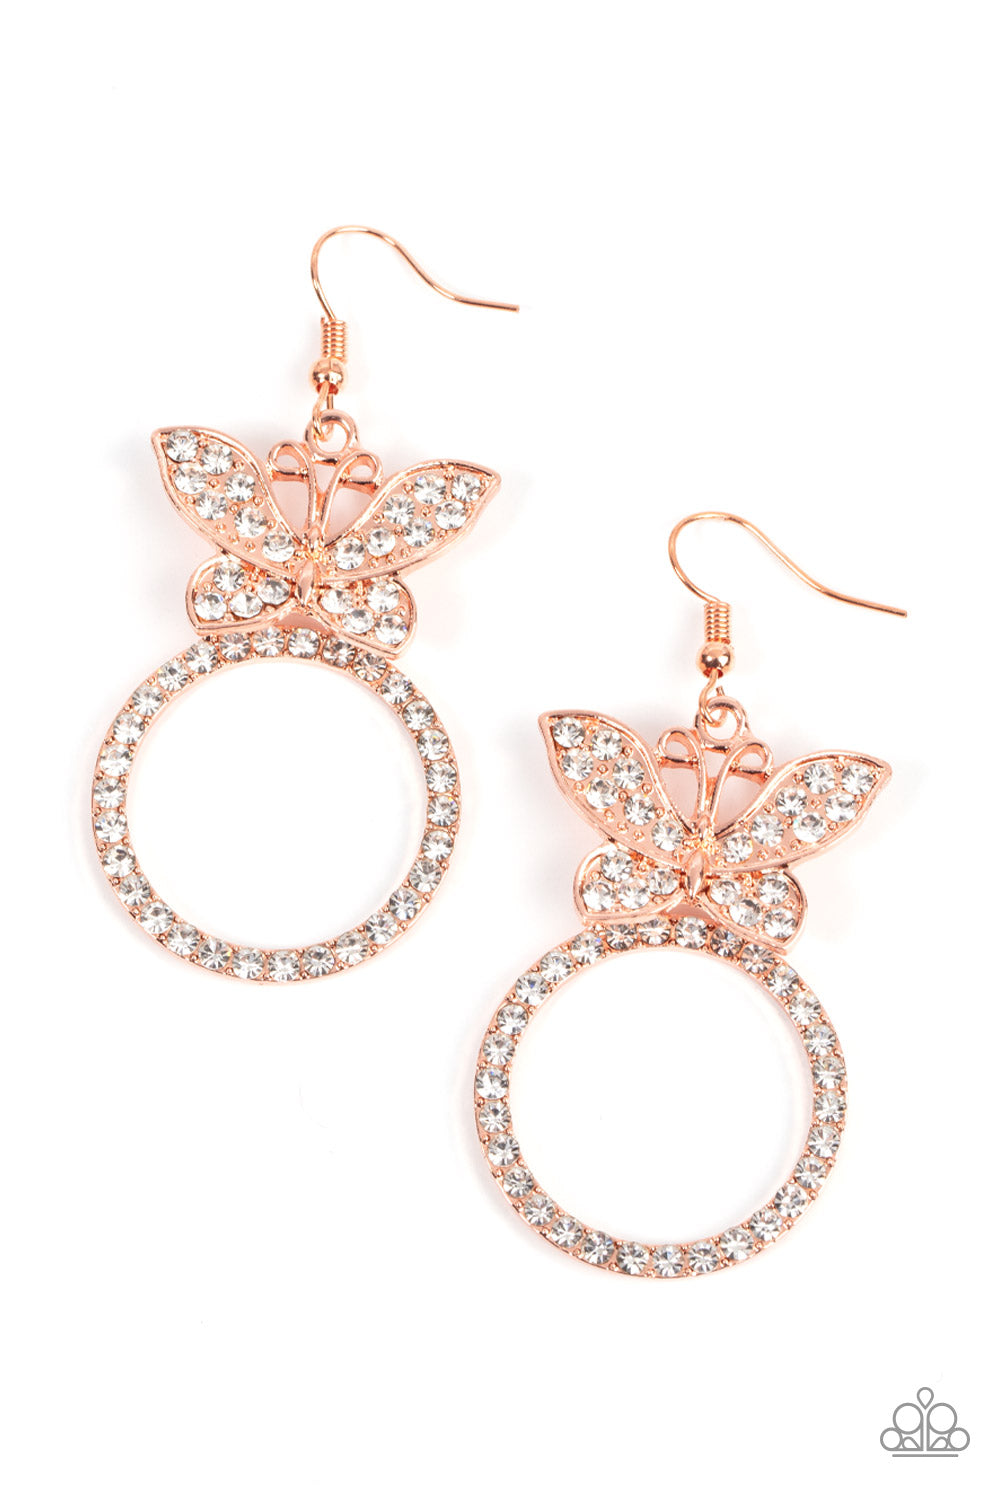 Paradise Found Earring (White, Gold, Copper)